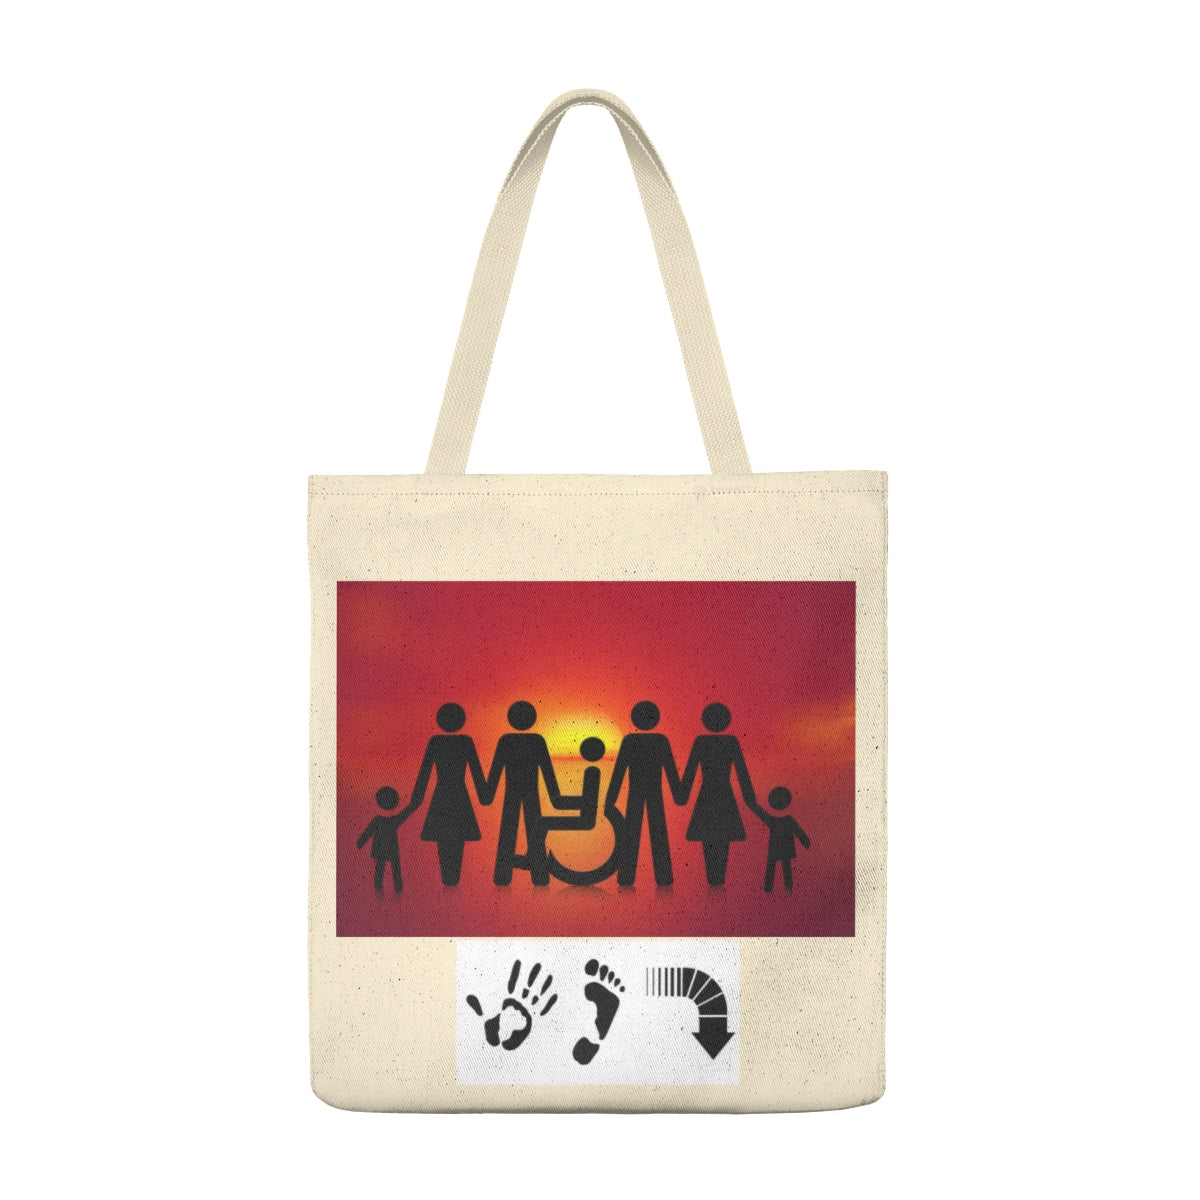 Five Toes Down Family Shoulder Tote Bag - Roomy